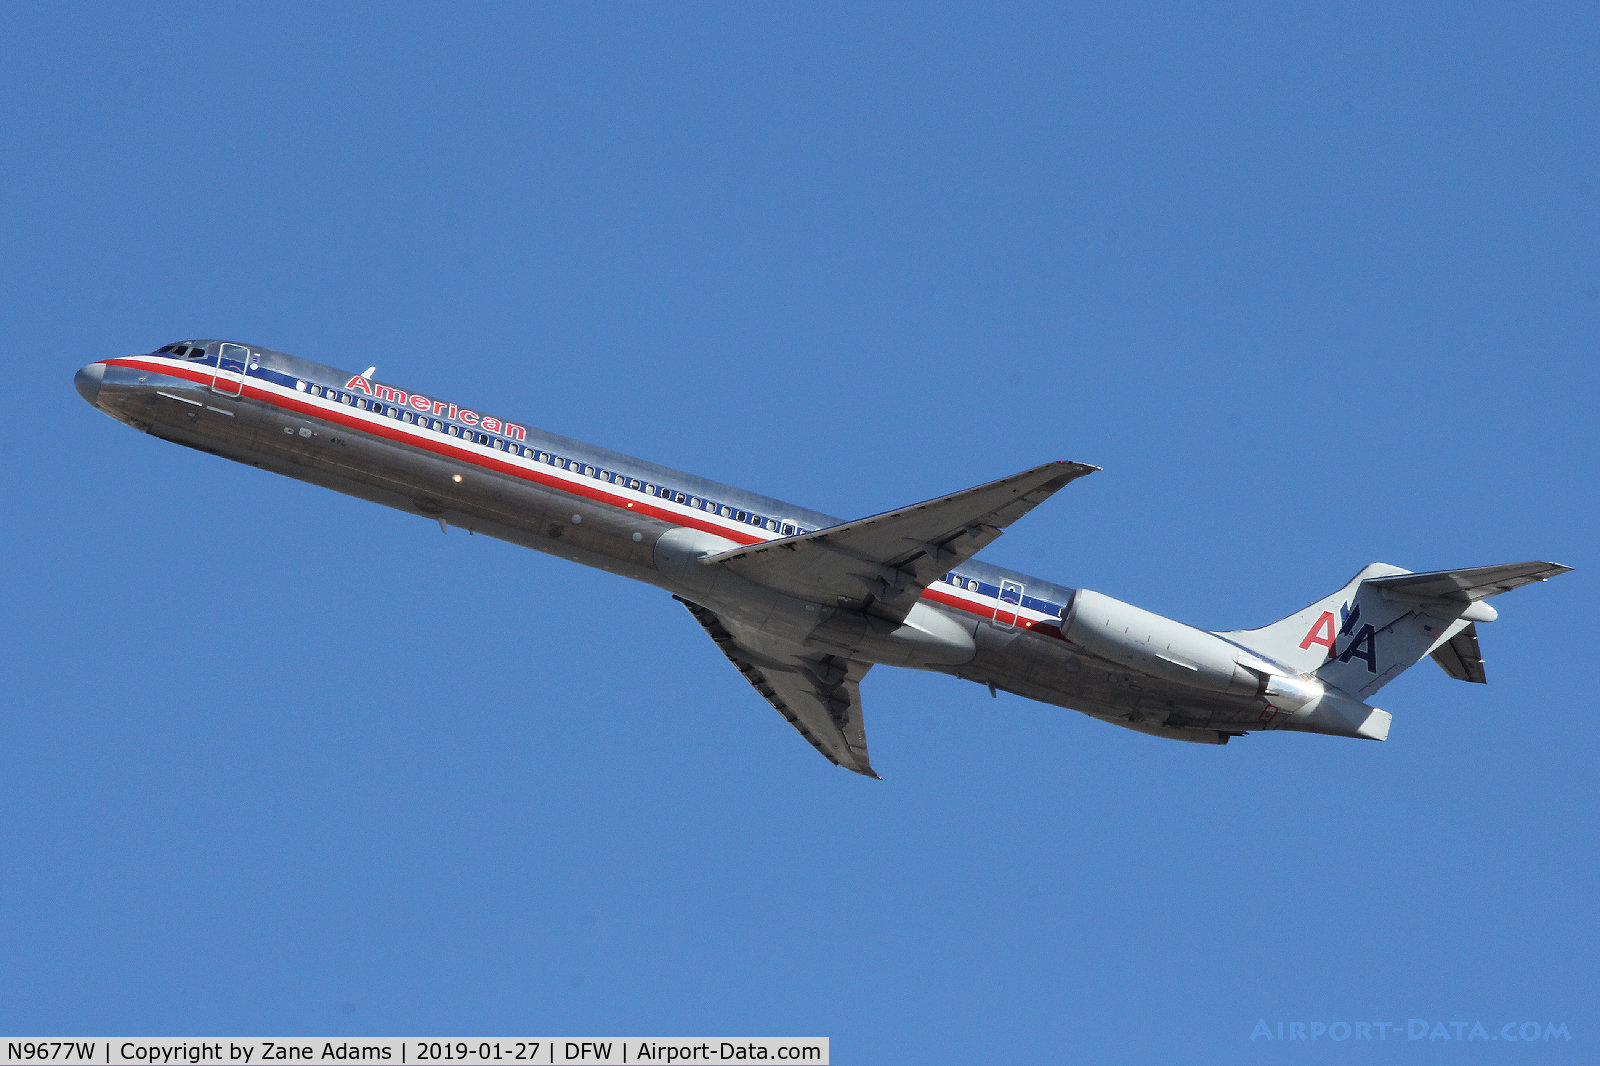 N9677W, 1999 McDonnell Douglas MD-83 (DC-9-83) C/N 53627, Departing DFW Airport